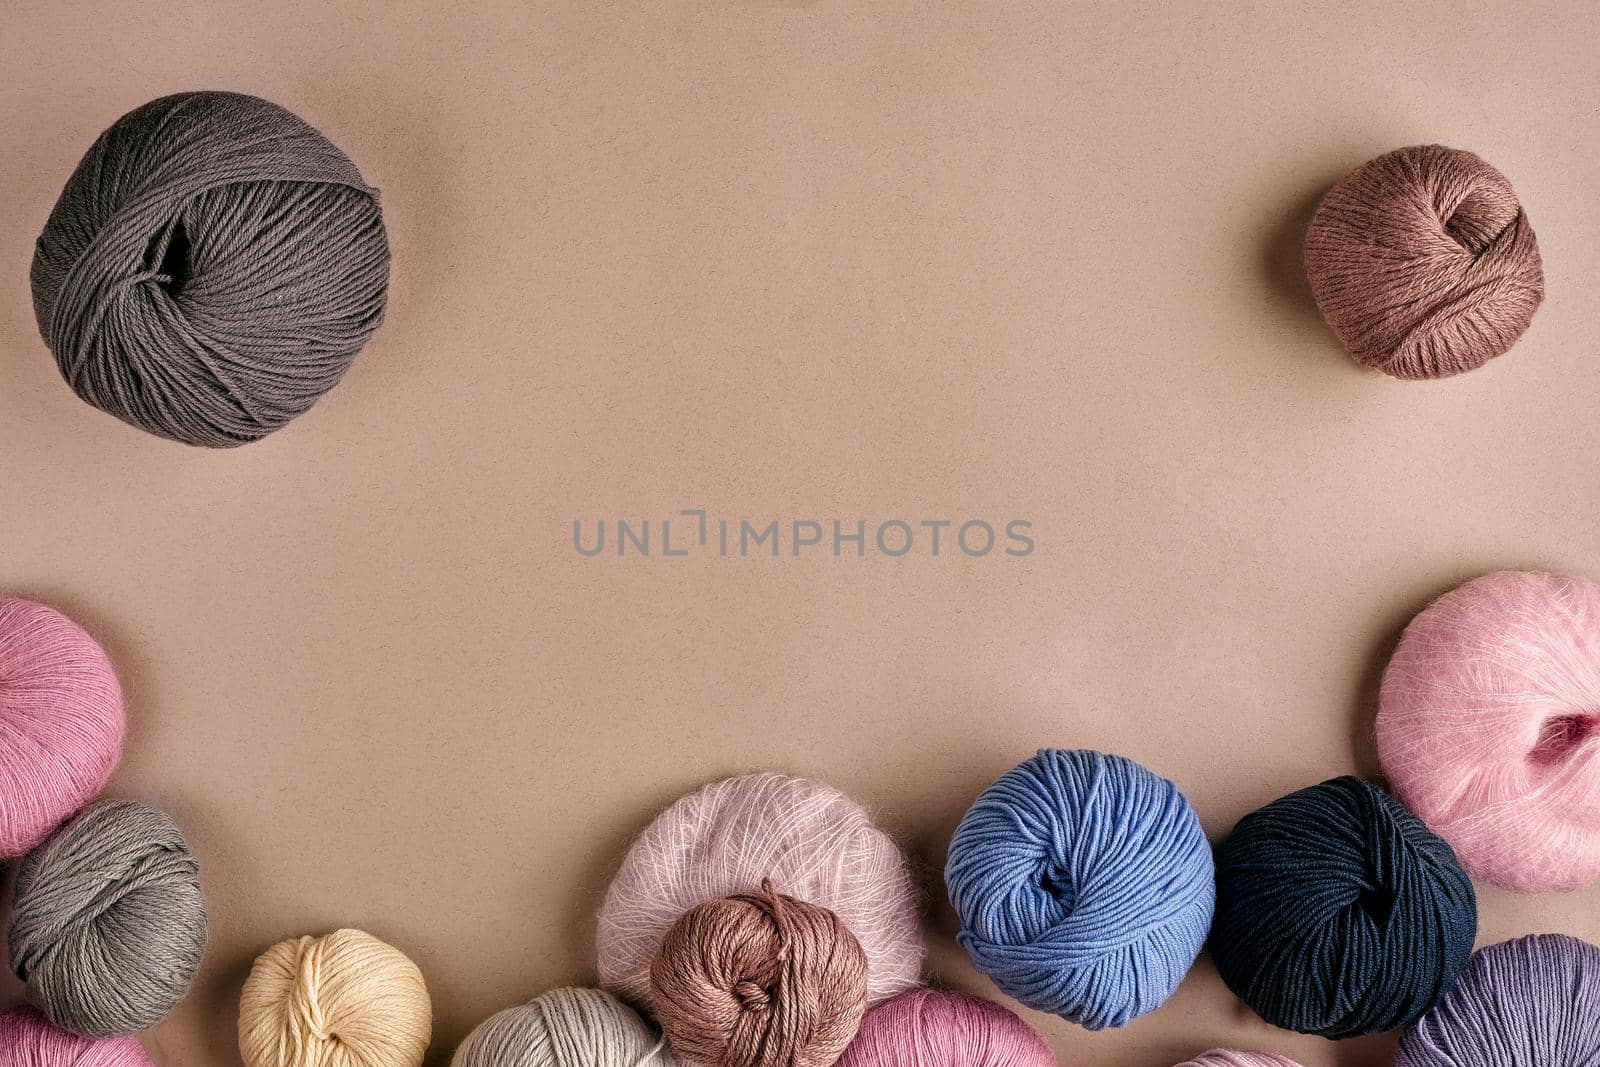 Set of colorful wool yarn on beige background. Knitting as a kind of needlework. Colorful balls of yarn and knitting needles. Top view. Still life. Copy space. Flat lay